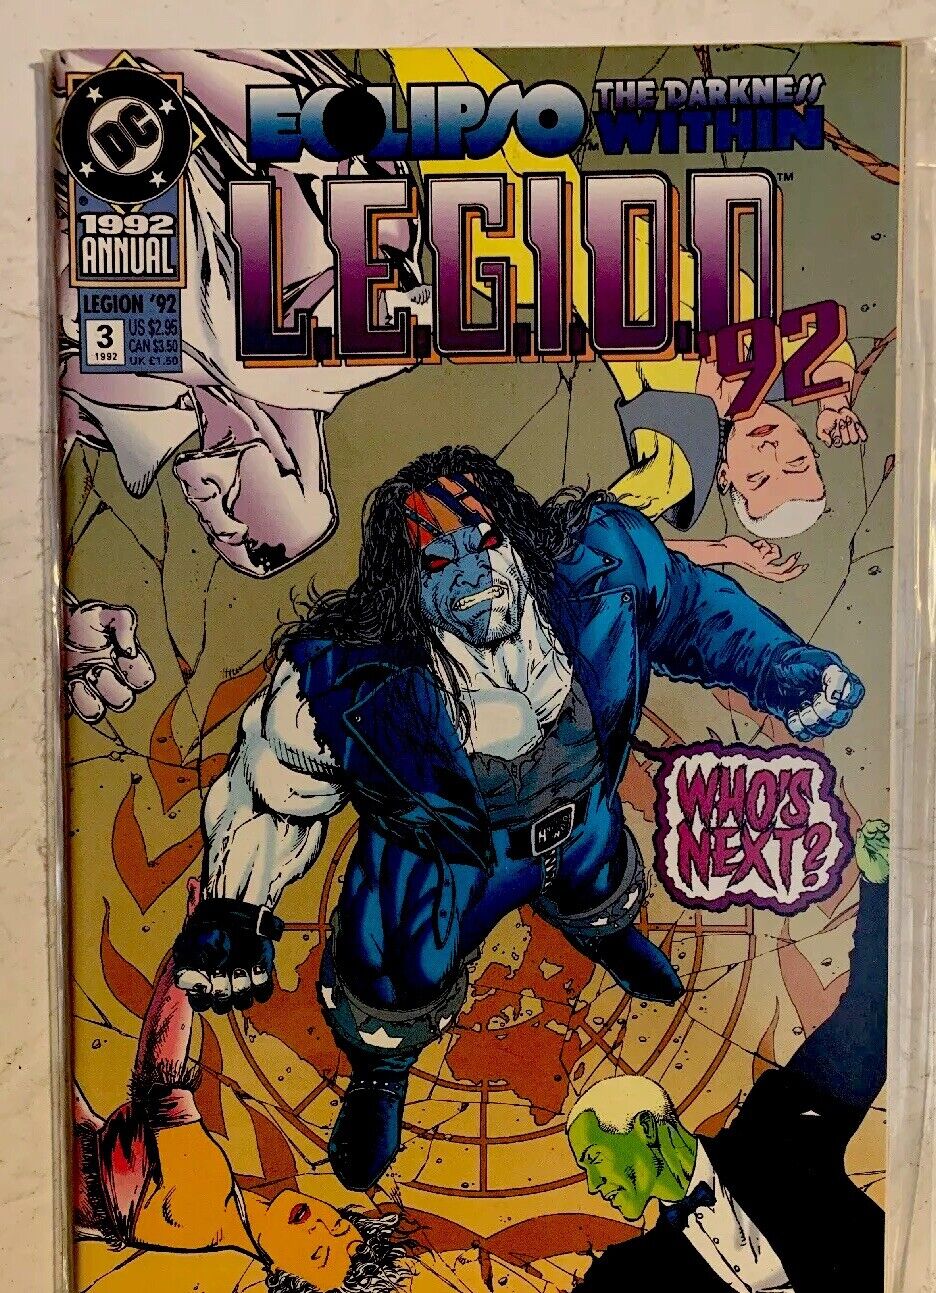 L.E.G.I.O.N \'92 ANNUAL #3 DC Comics 1992 Eclipso The Darkness Within \